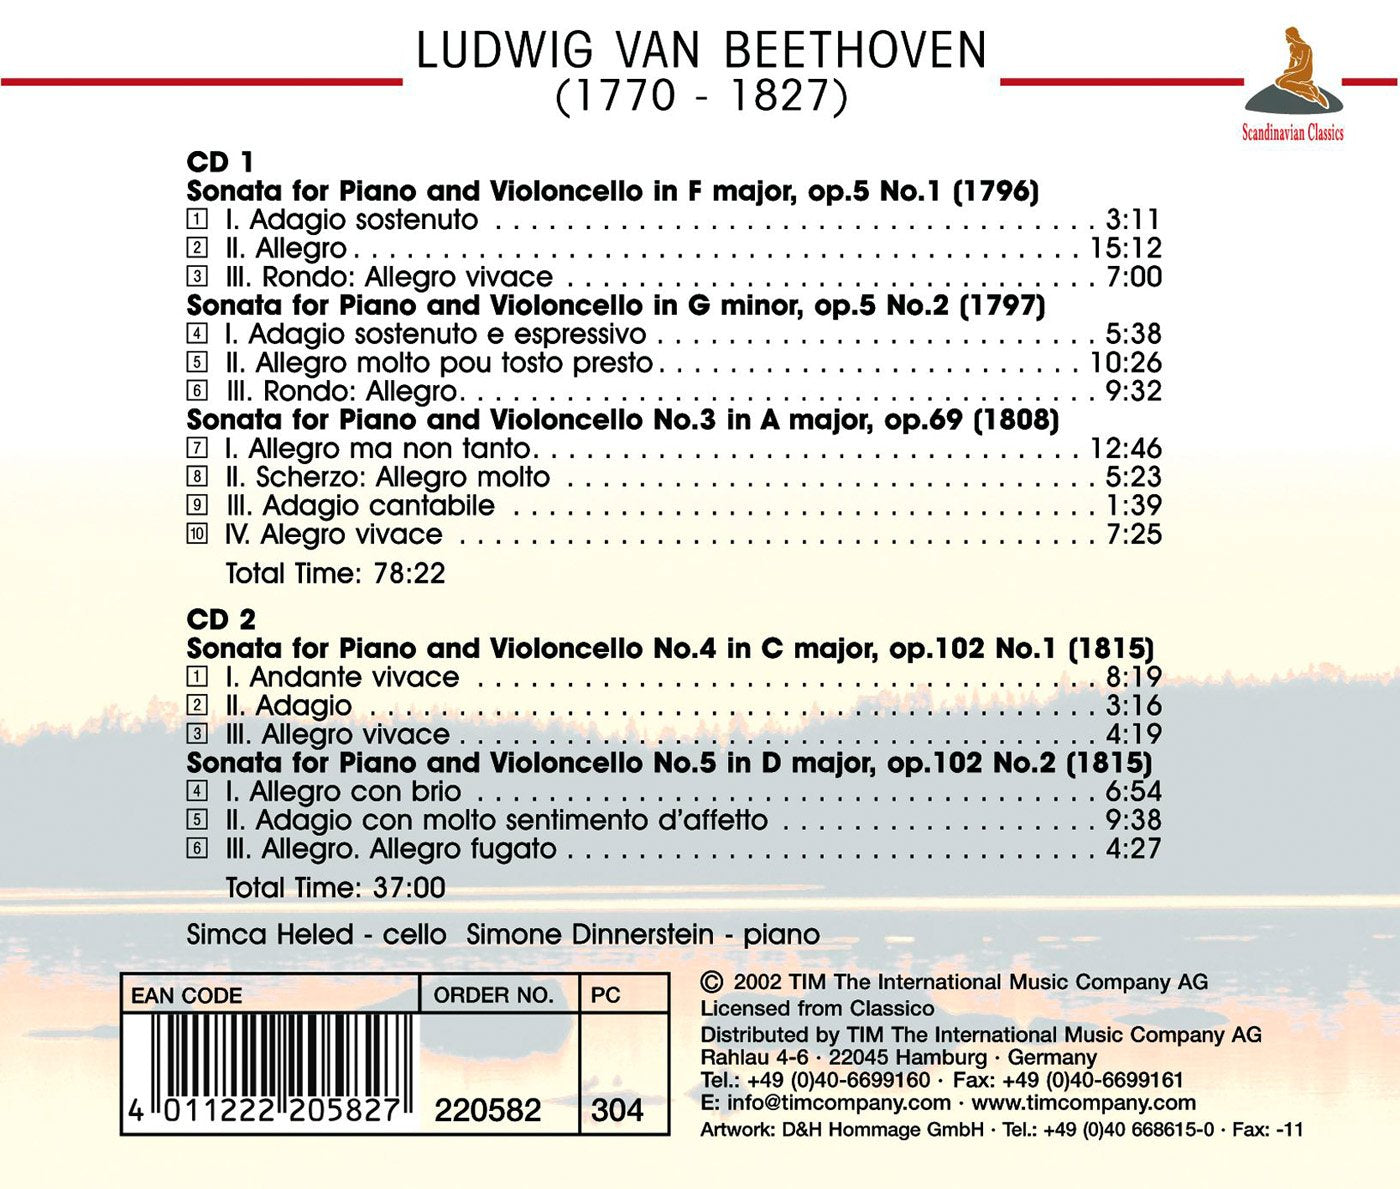 BEETHOVEN: Sonatas for Cello and Piano Nos. 1-5 - DINNERSTEIN, HELED (2 CDS)